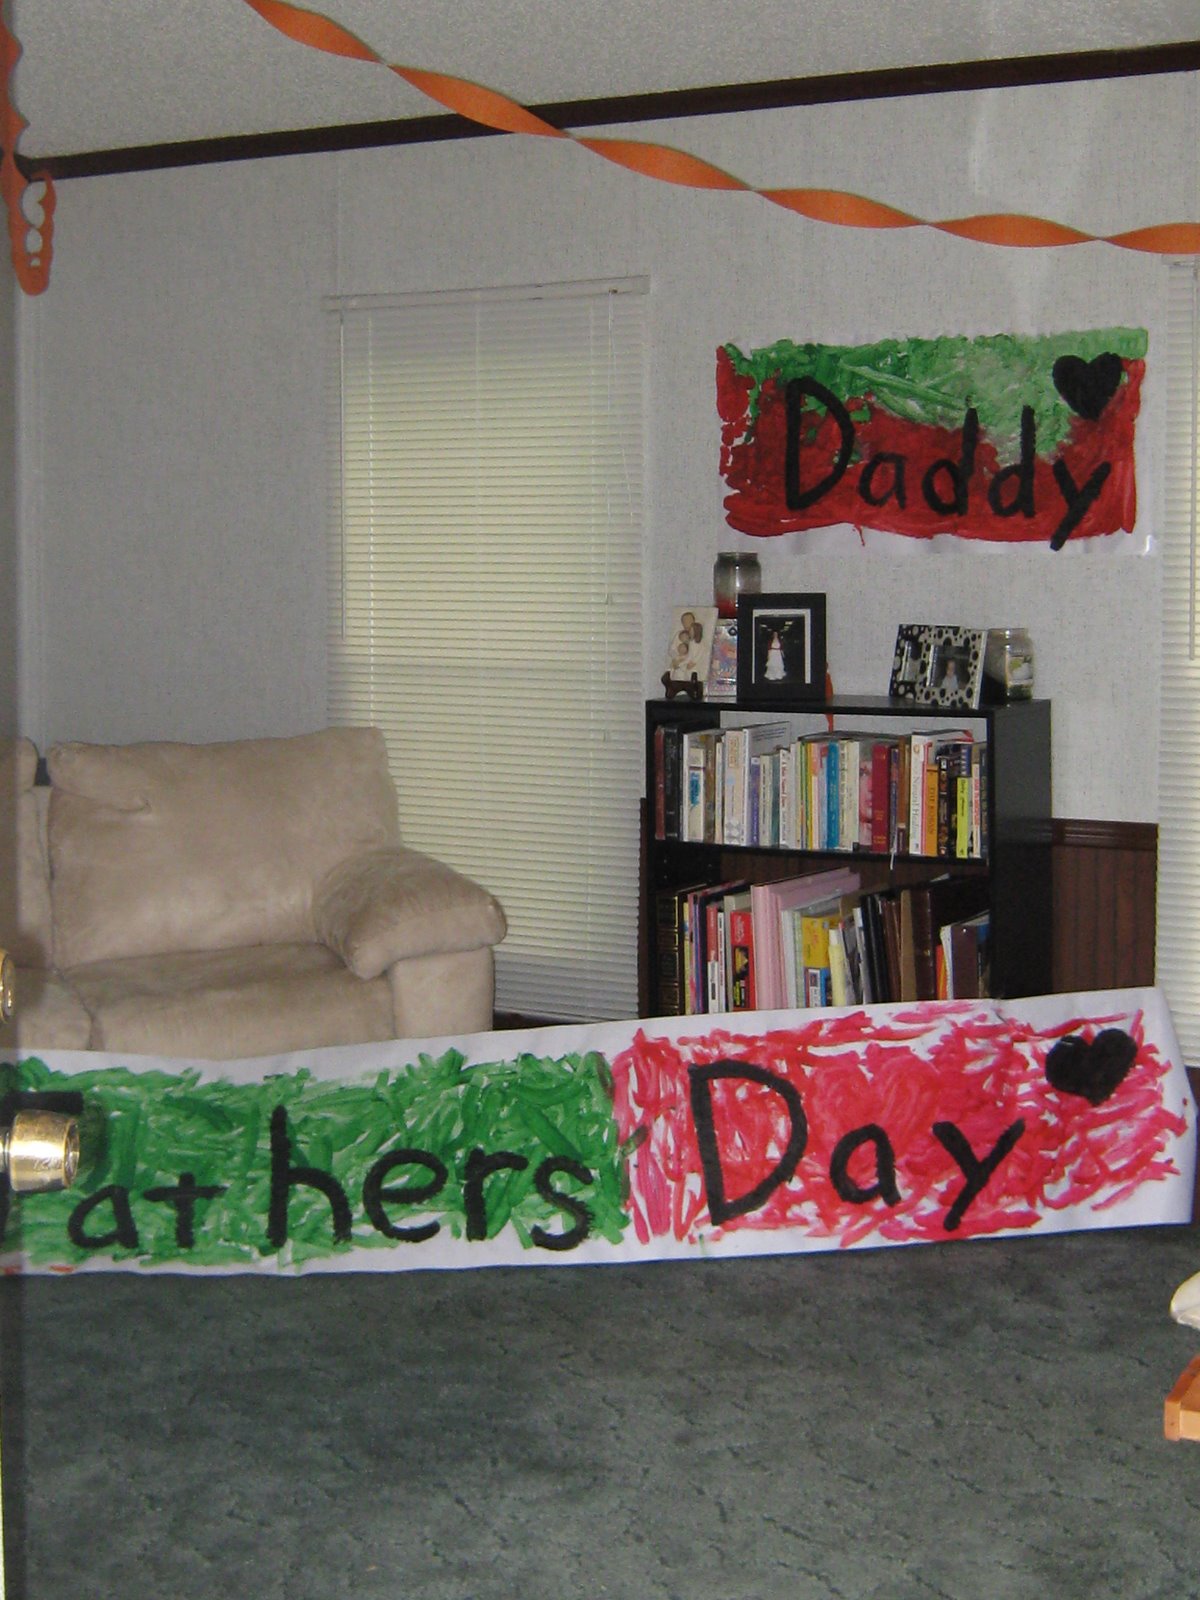 [Fathers+Day+006.jpg]